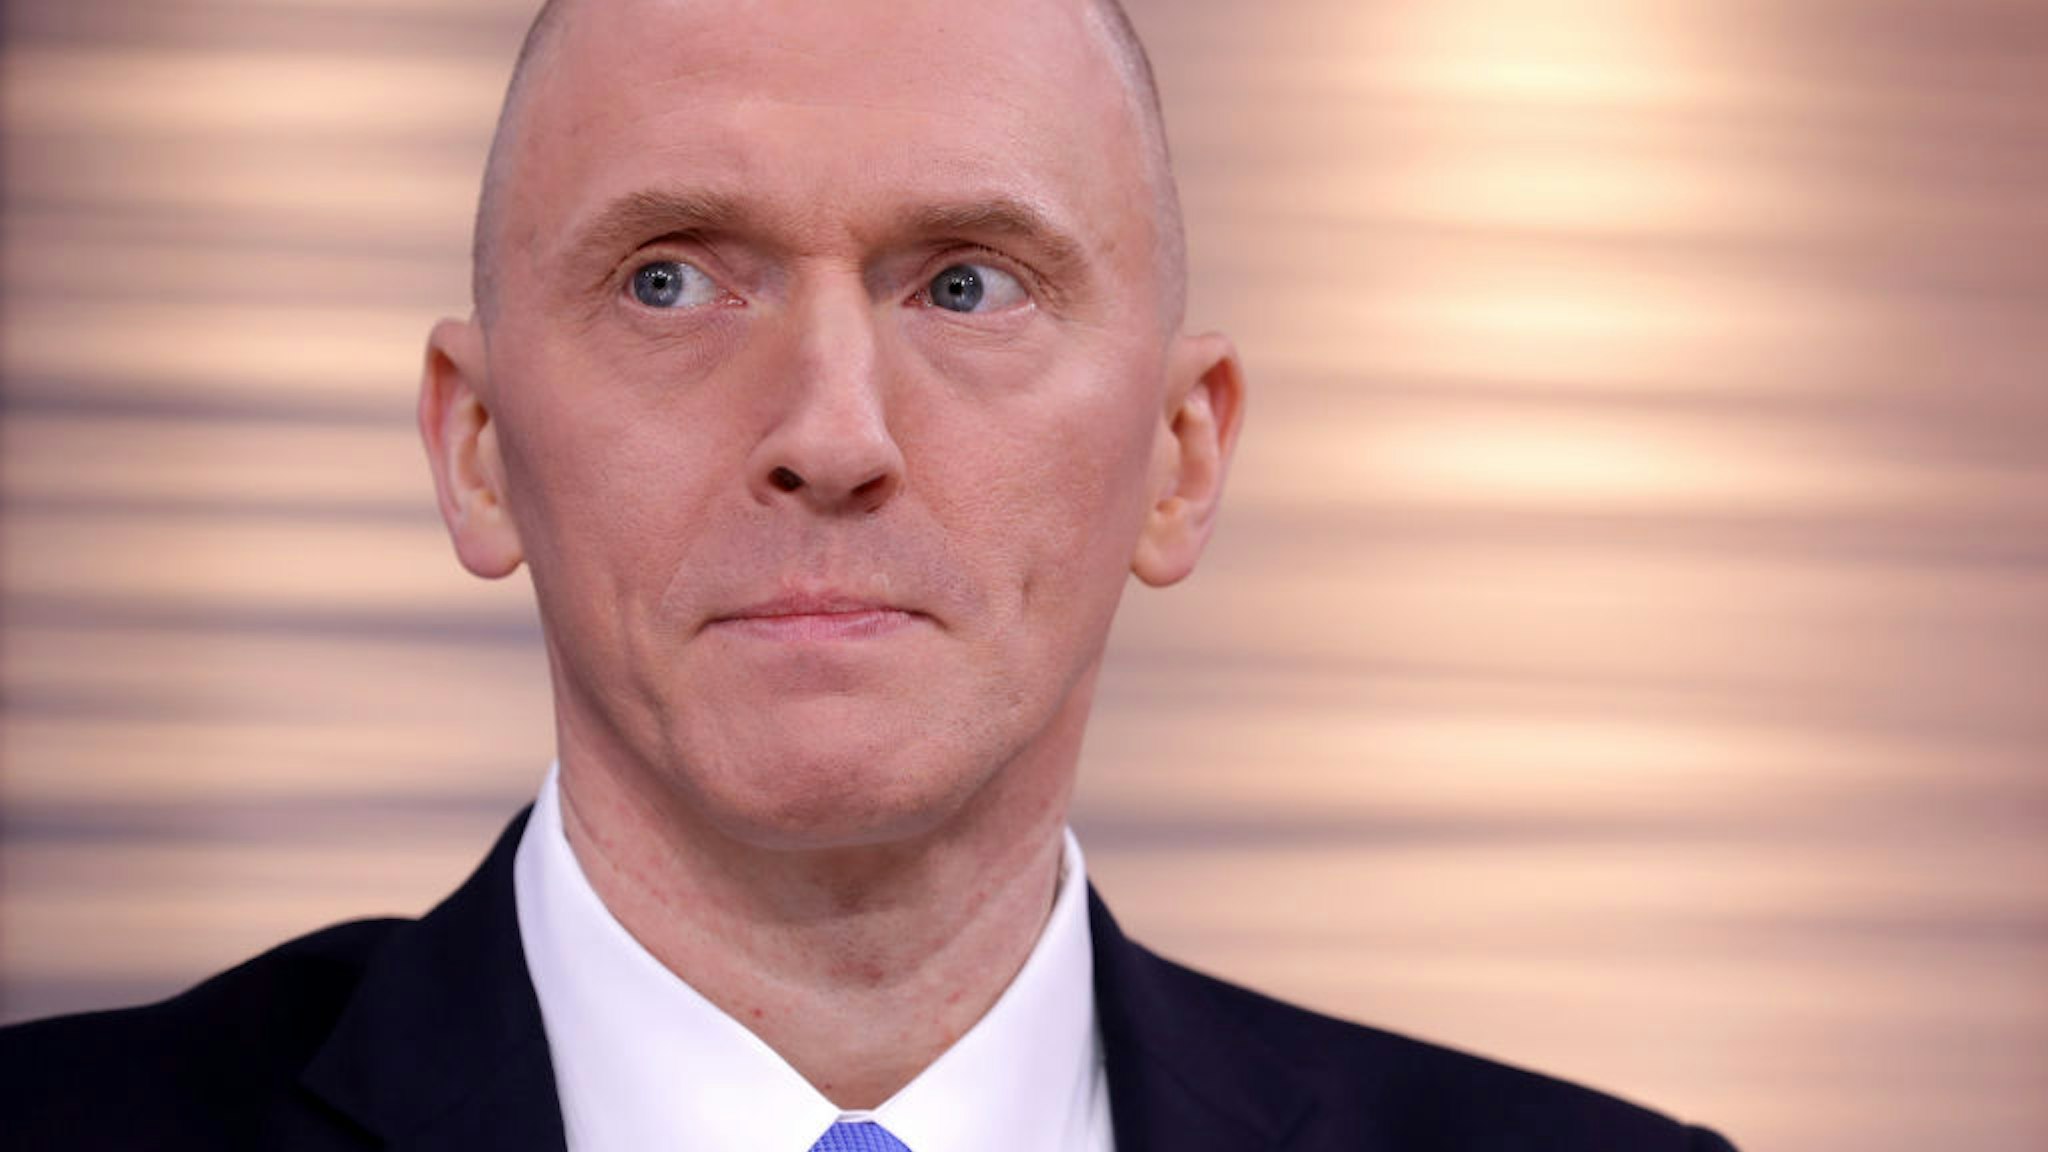 Global Natural Gas Ventures founder Carter Page participates in a discussion on 'politicization of DOJ and the intelligence community in their efforts to undermine the president' hosted by Judicial Watch at the One America News studios on Capitol Hill May 29, 2019 in Washington, DC.